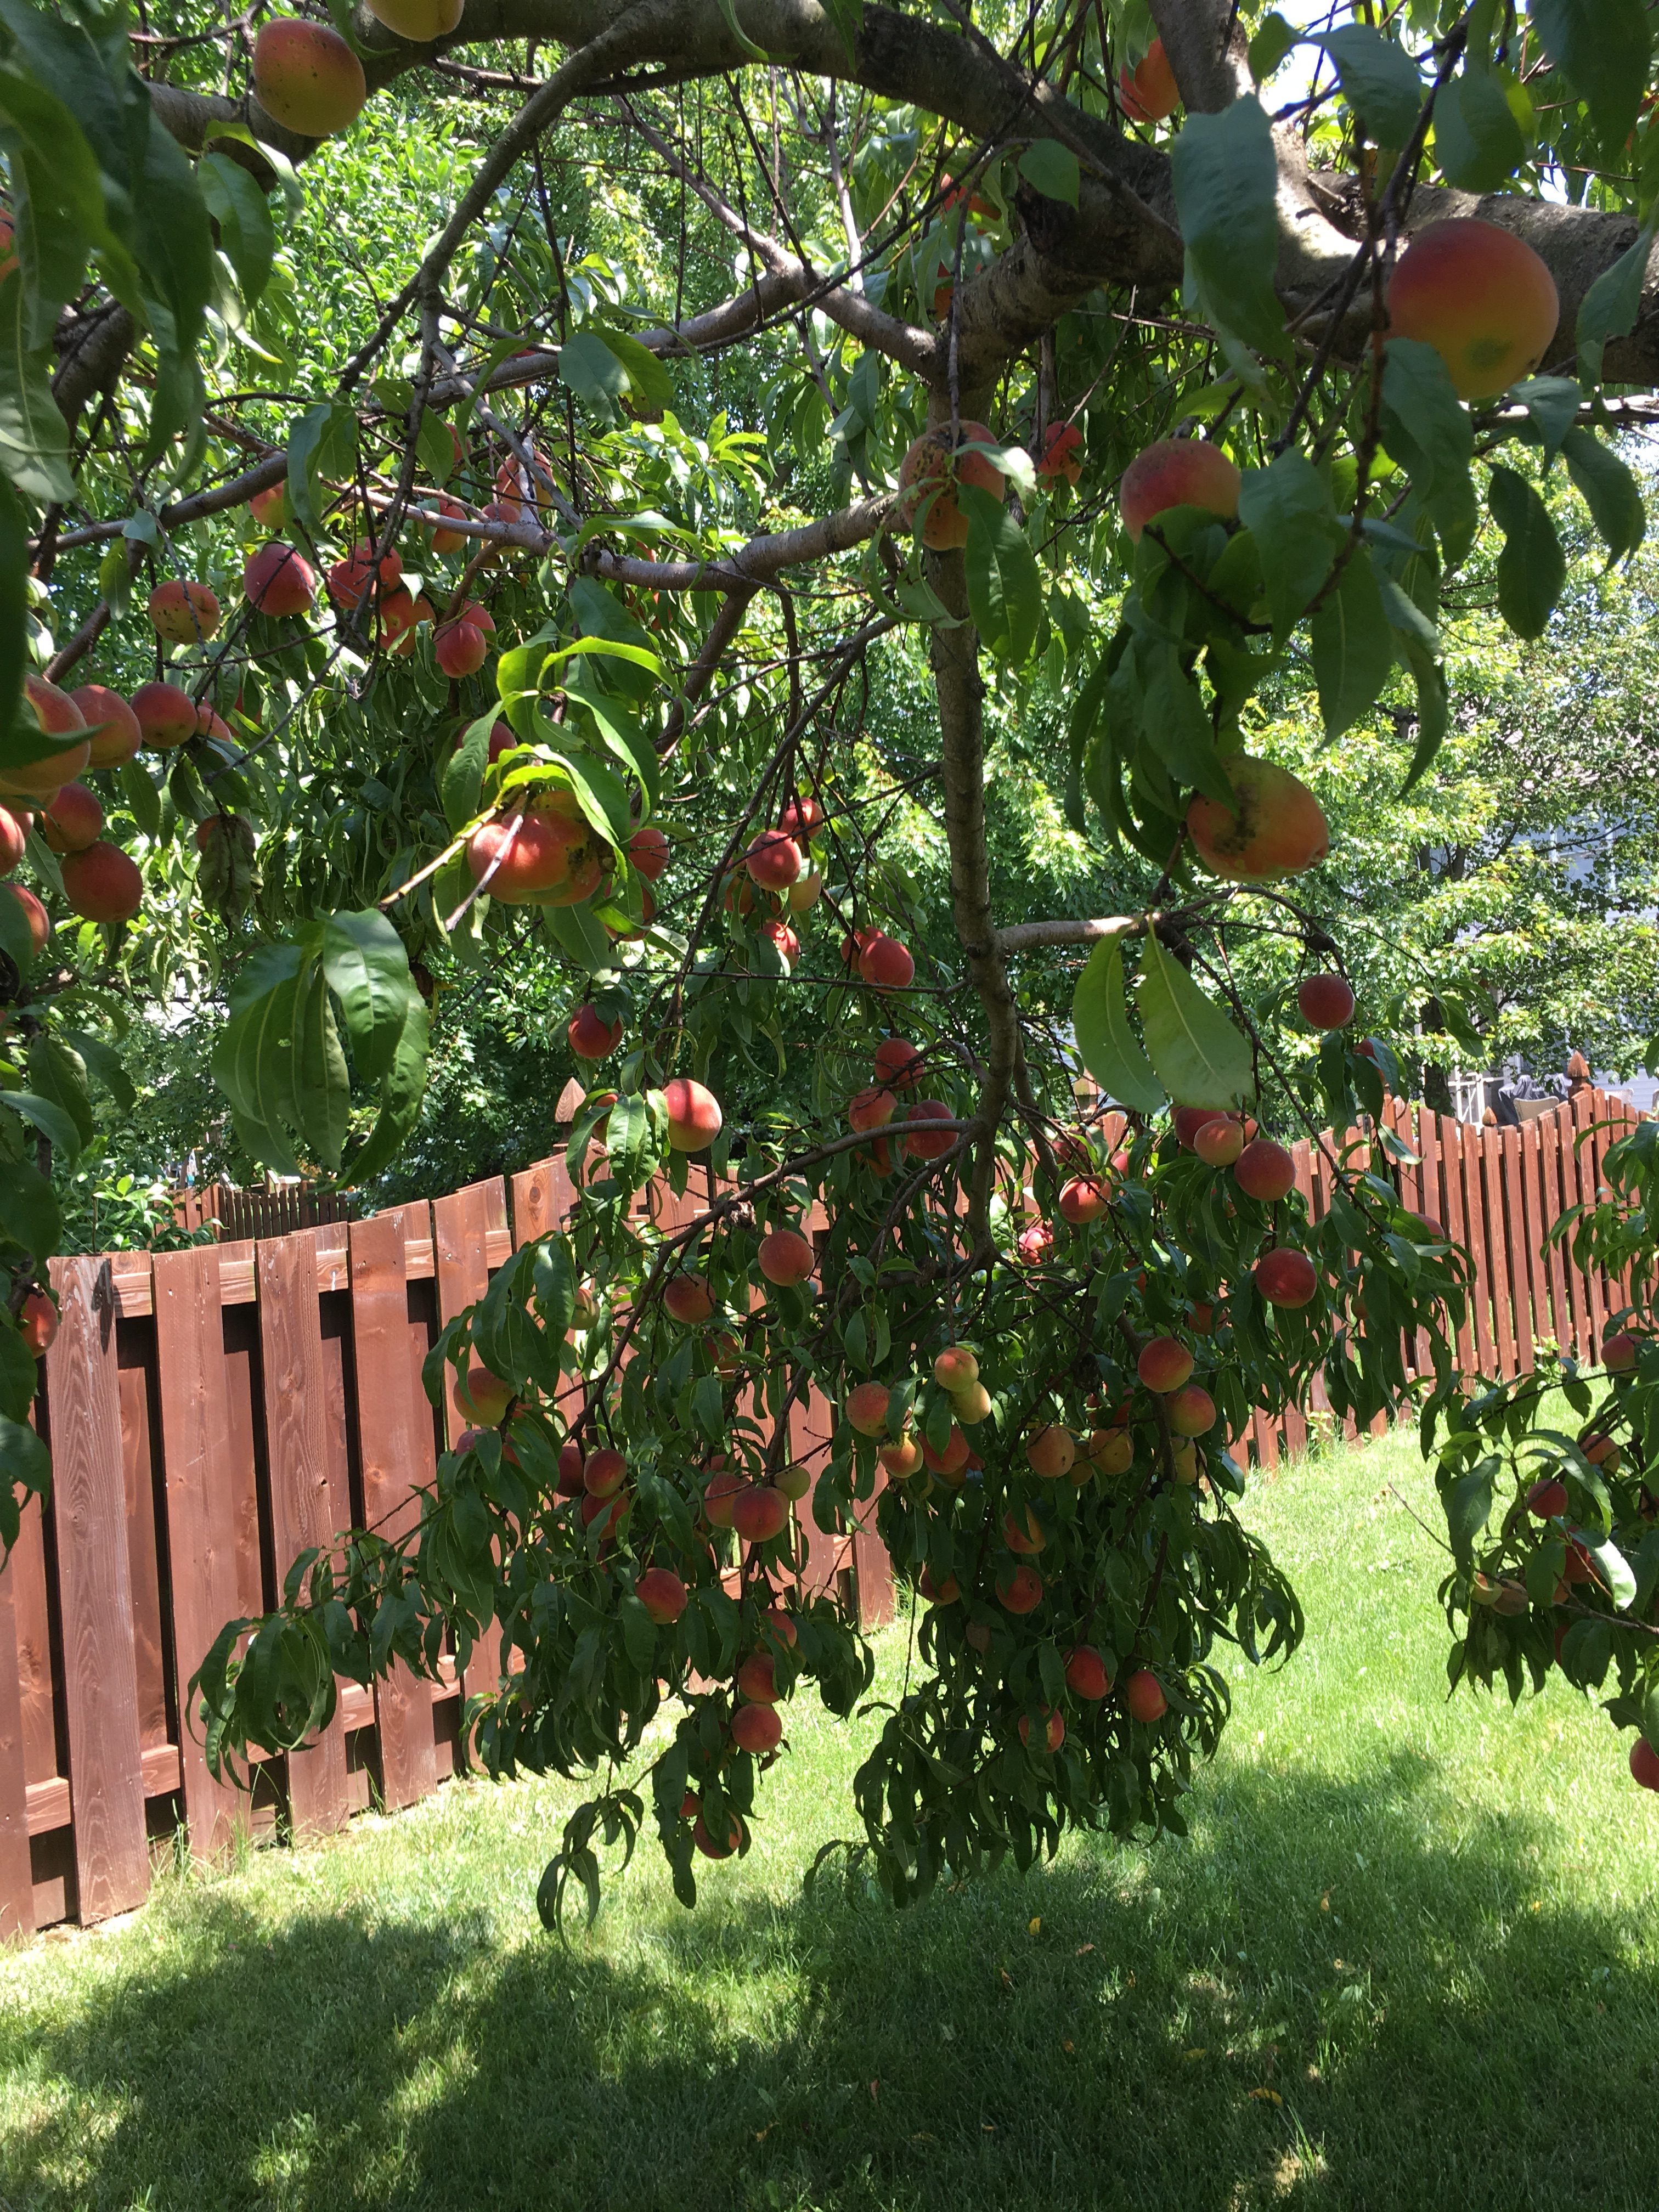 A Fruit Tree Fertilized and Treated by the Dallas Tree Doctor!